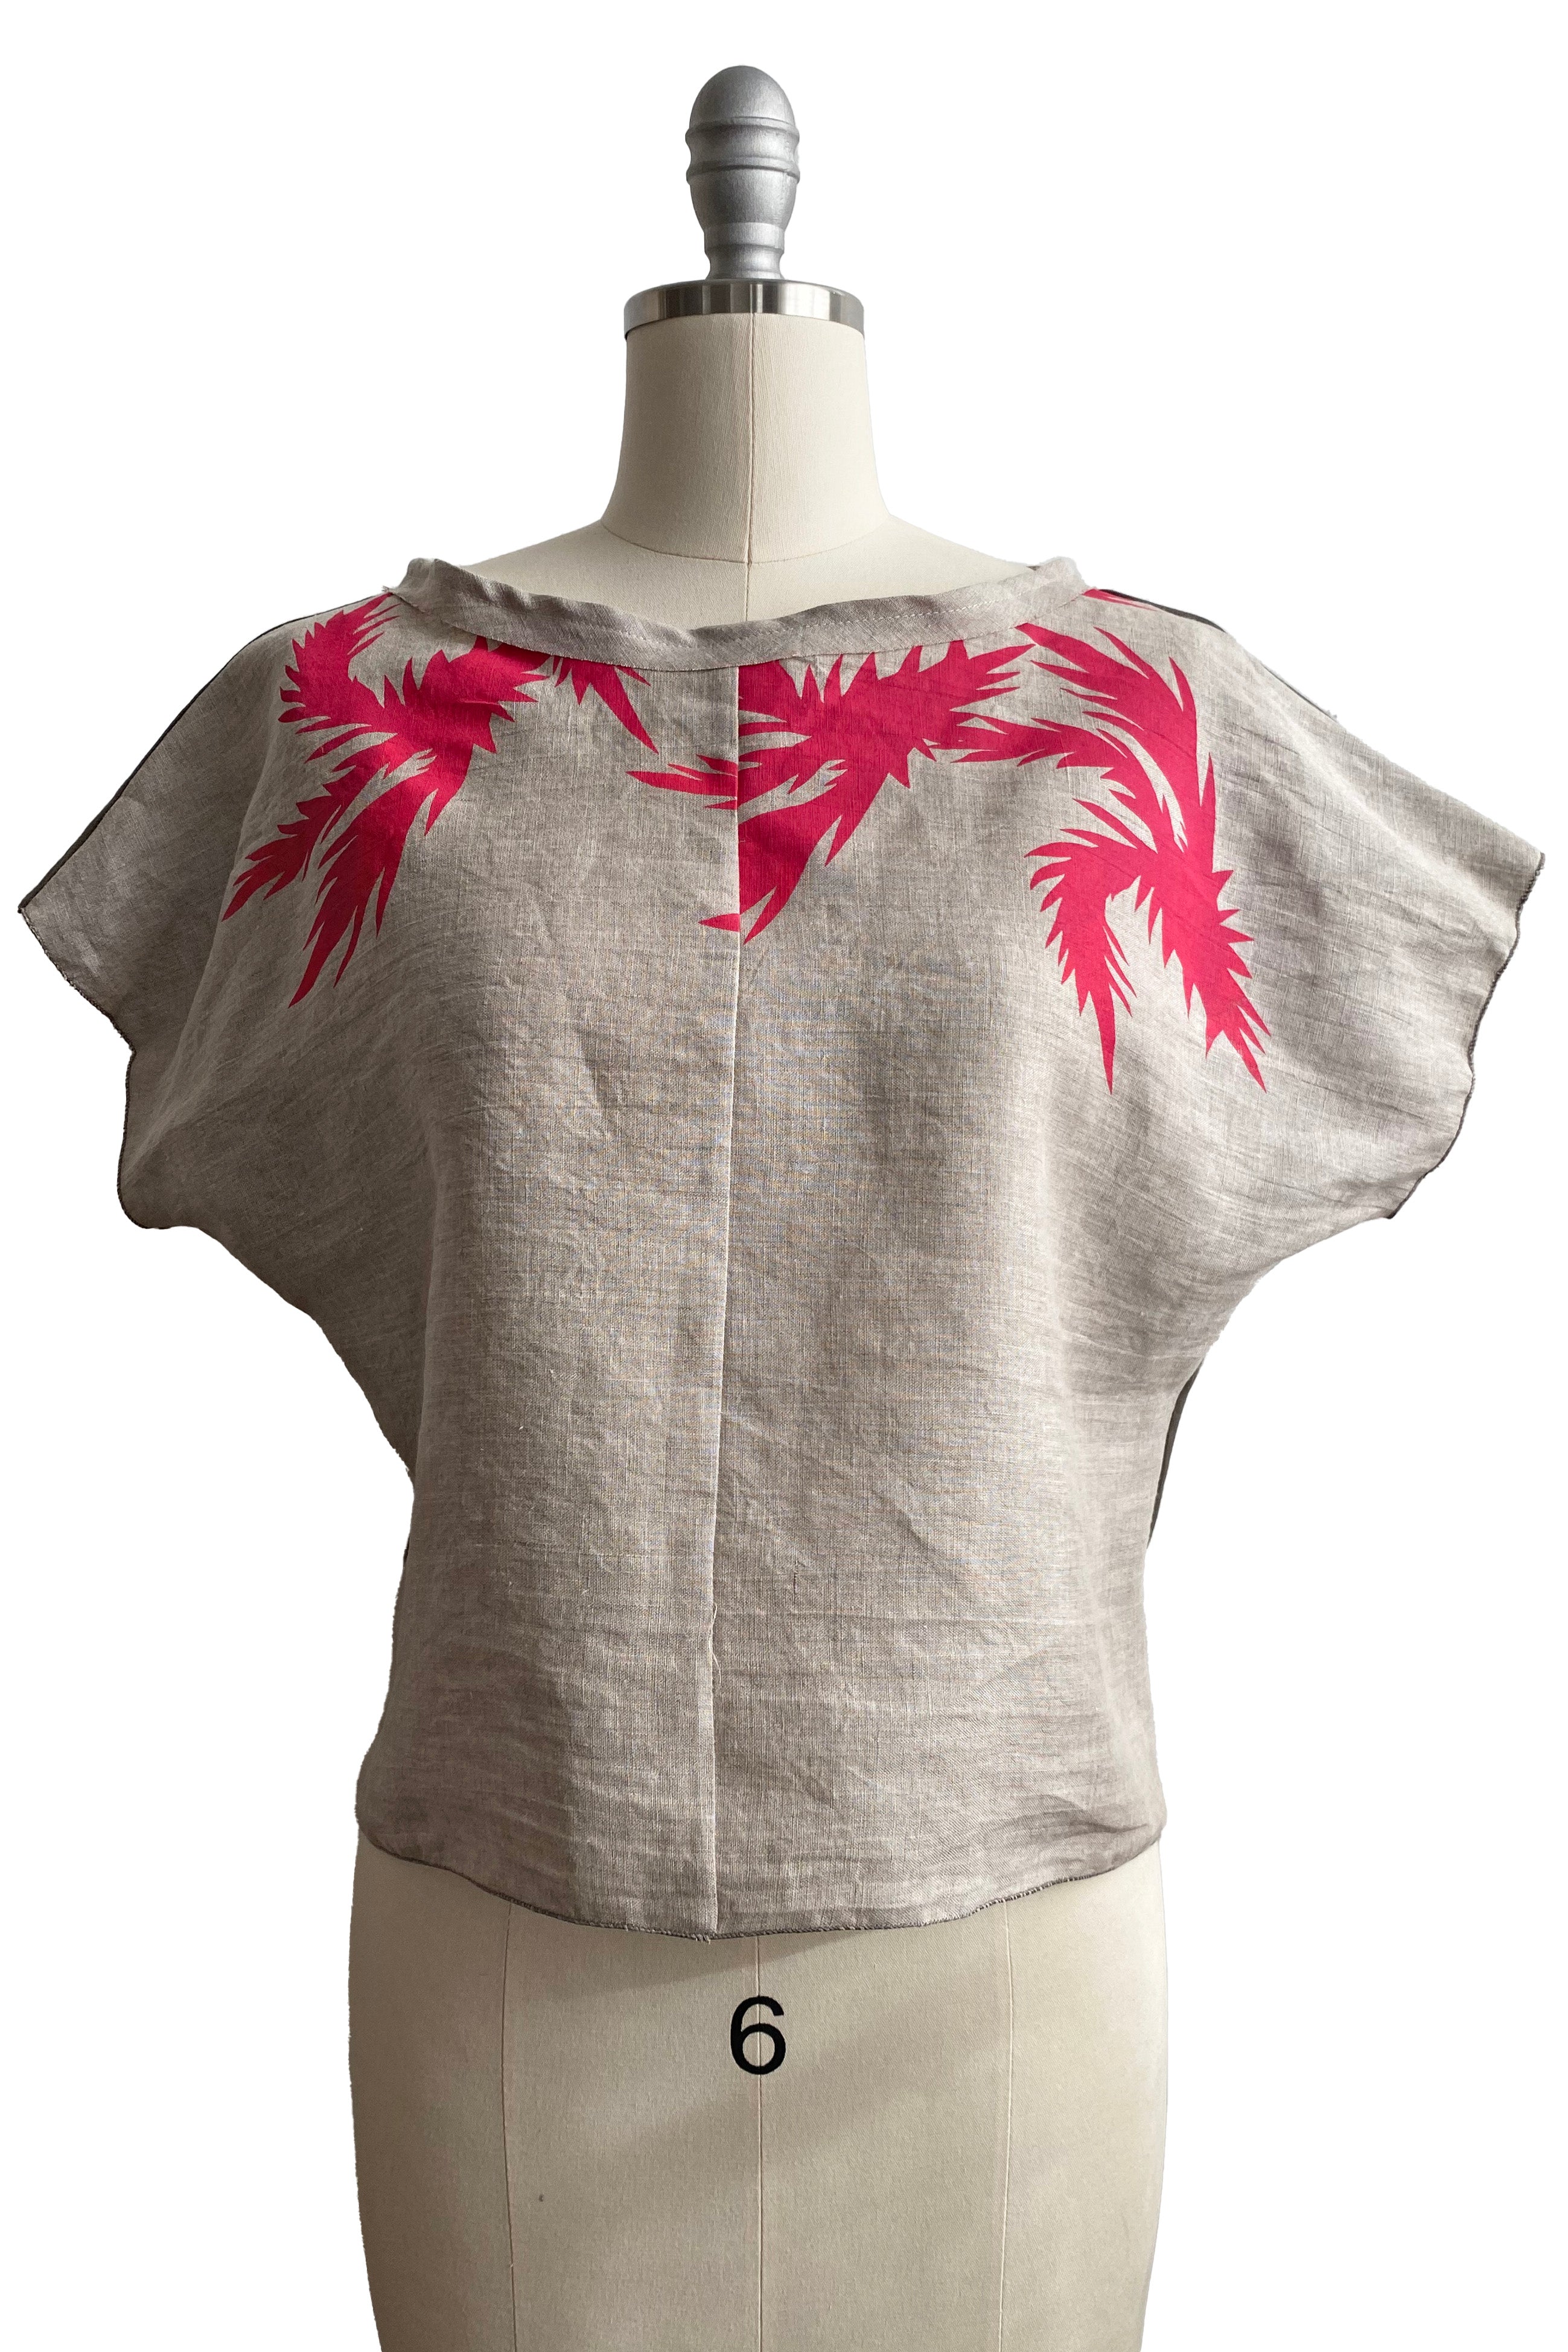 Jen Crop top in Linen w/ Thistle Print - Flax, Grey & Pink - Small